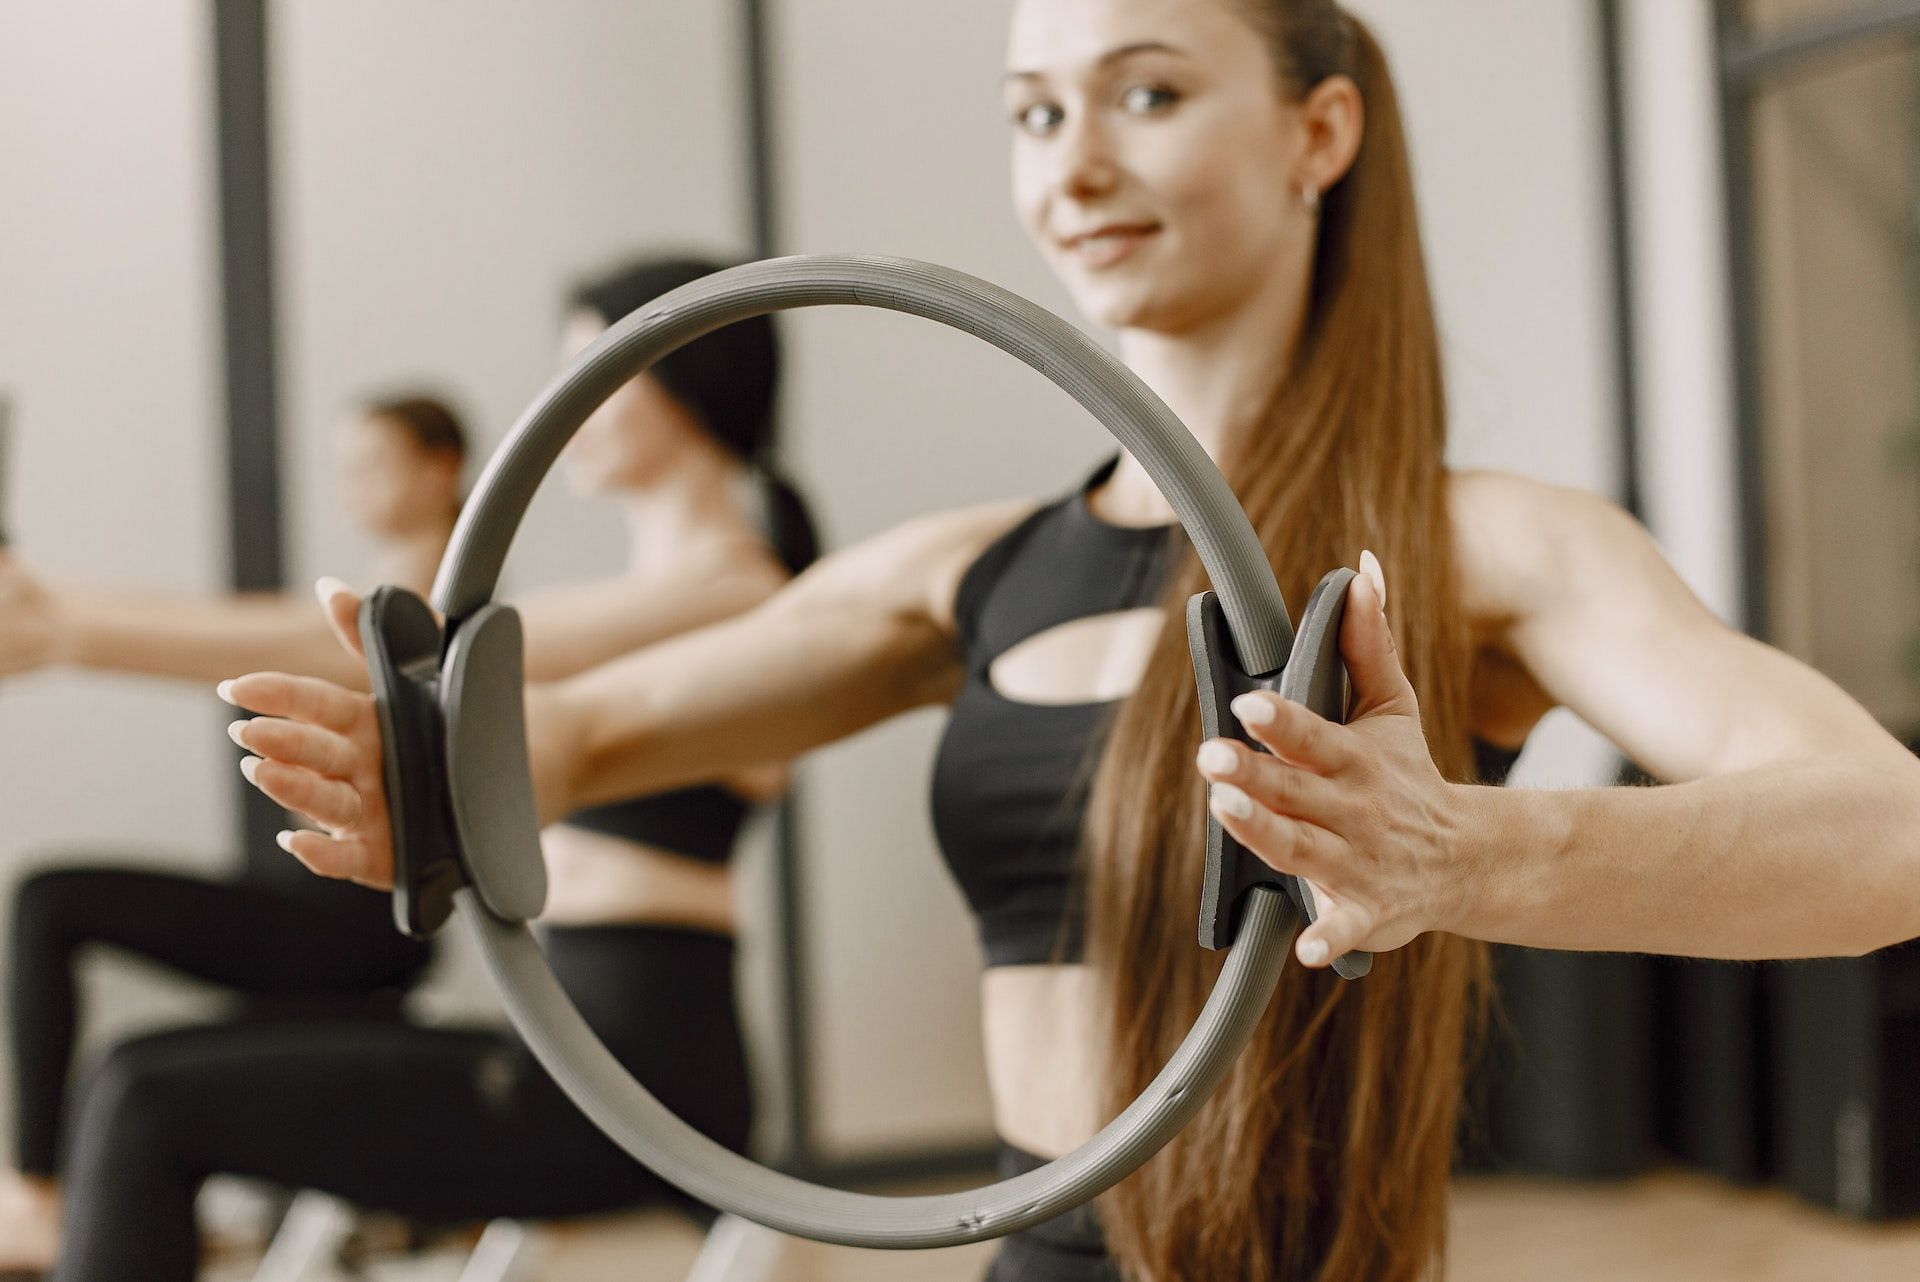 How Does a Pilates Ring Benefit Your Body / Fitness / Exercises